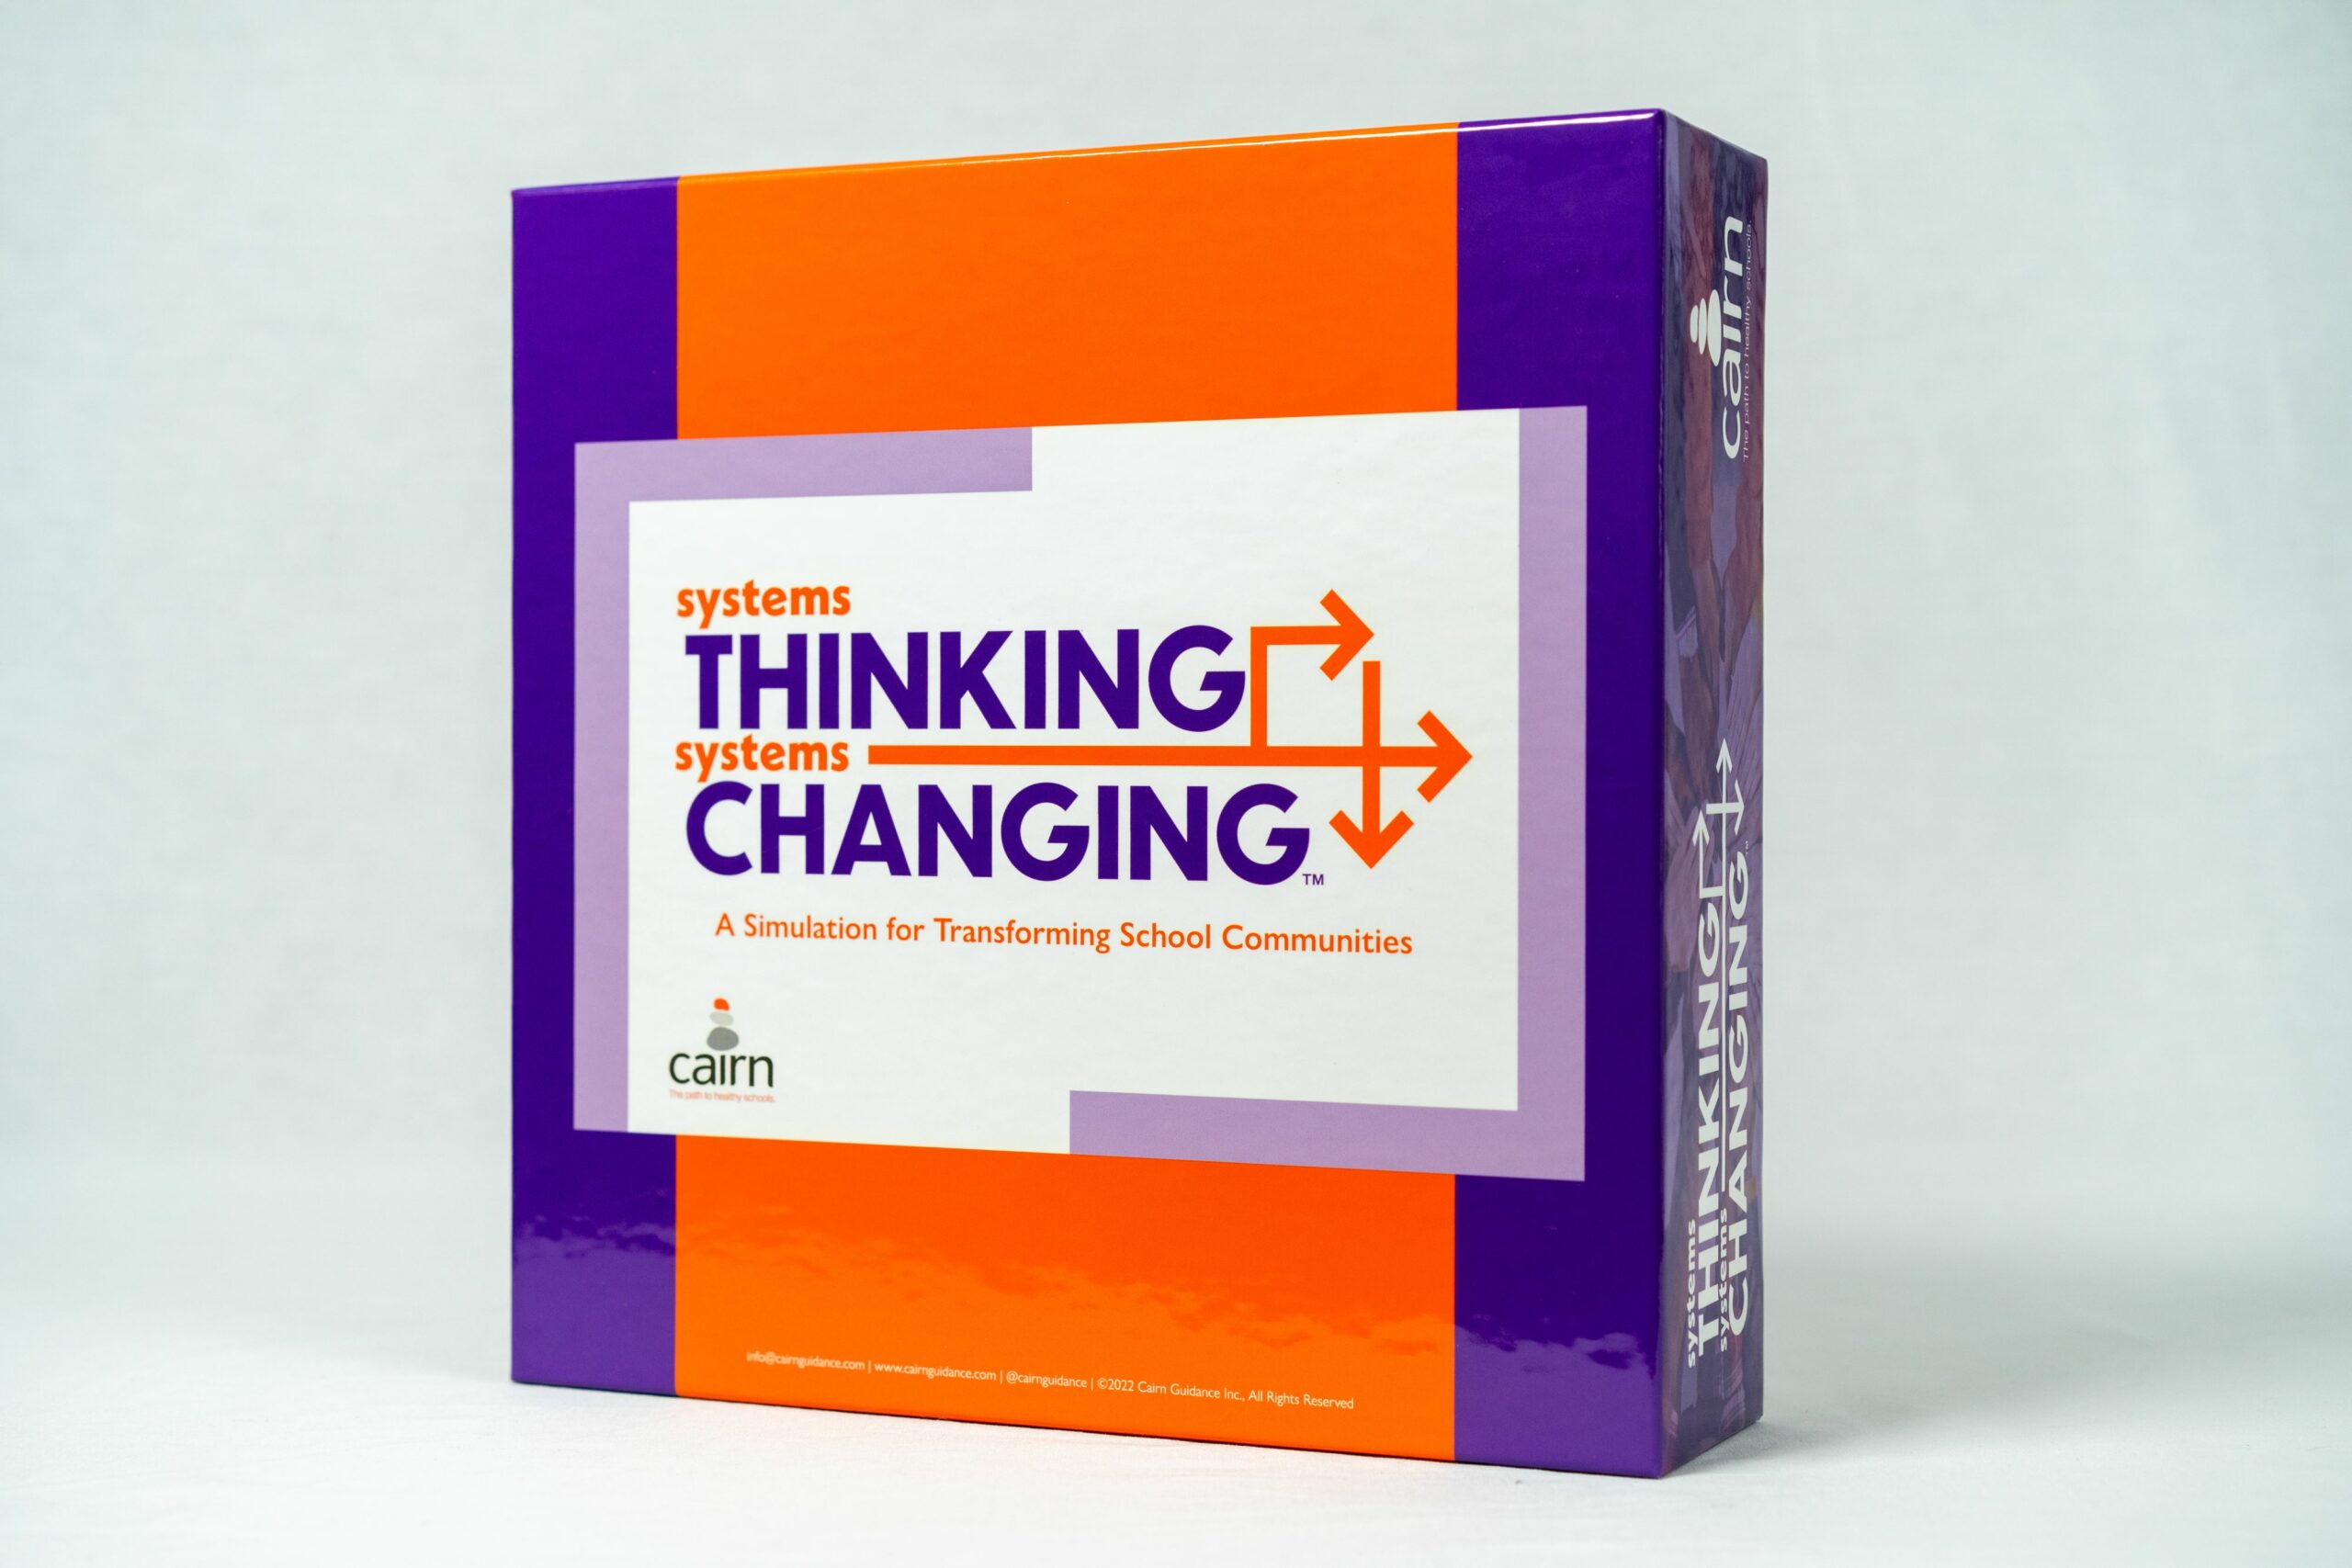 Systems Thinking; Systems Changing™